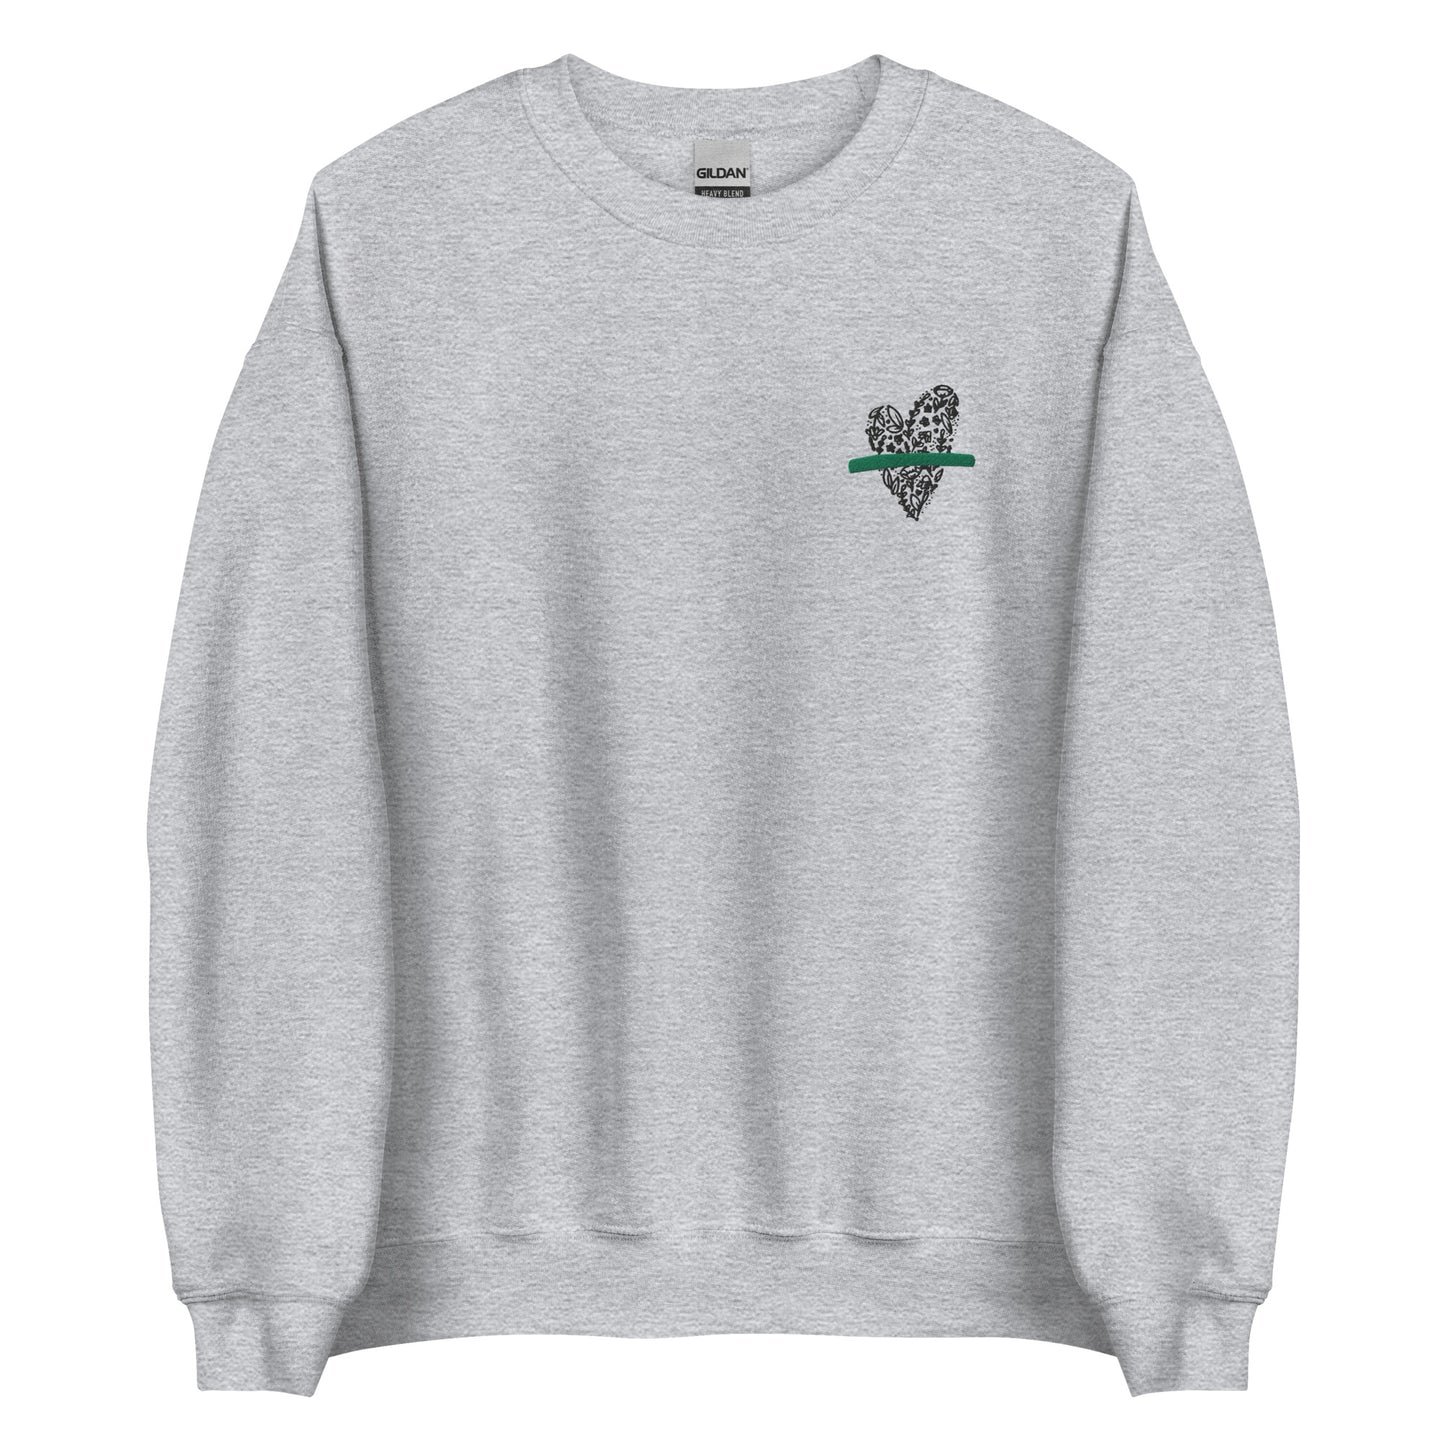 In My Heart Pullover - Military